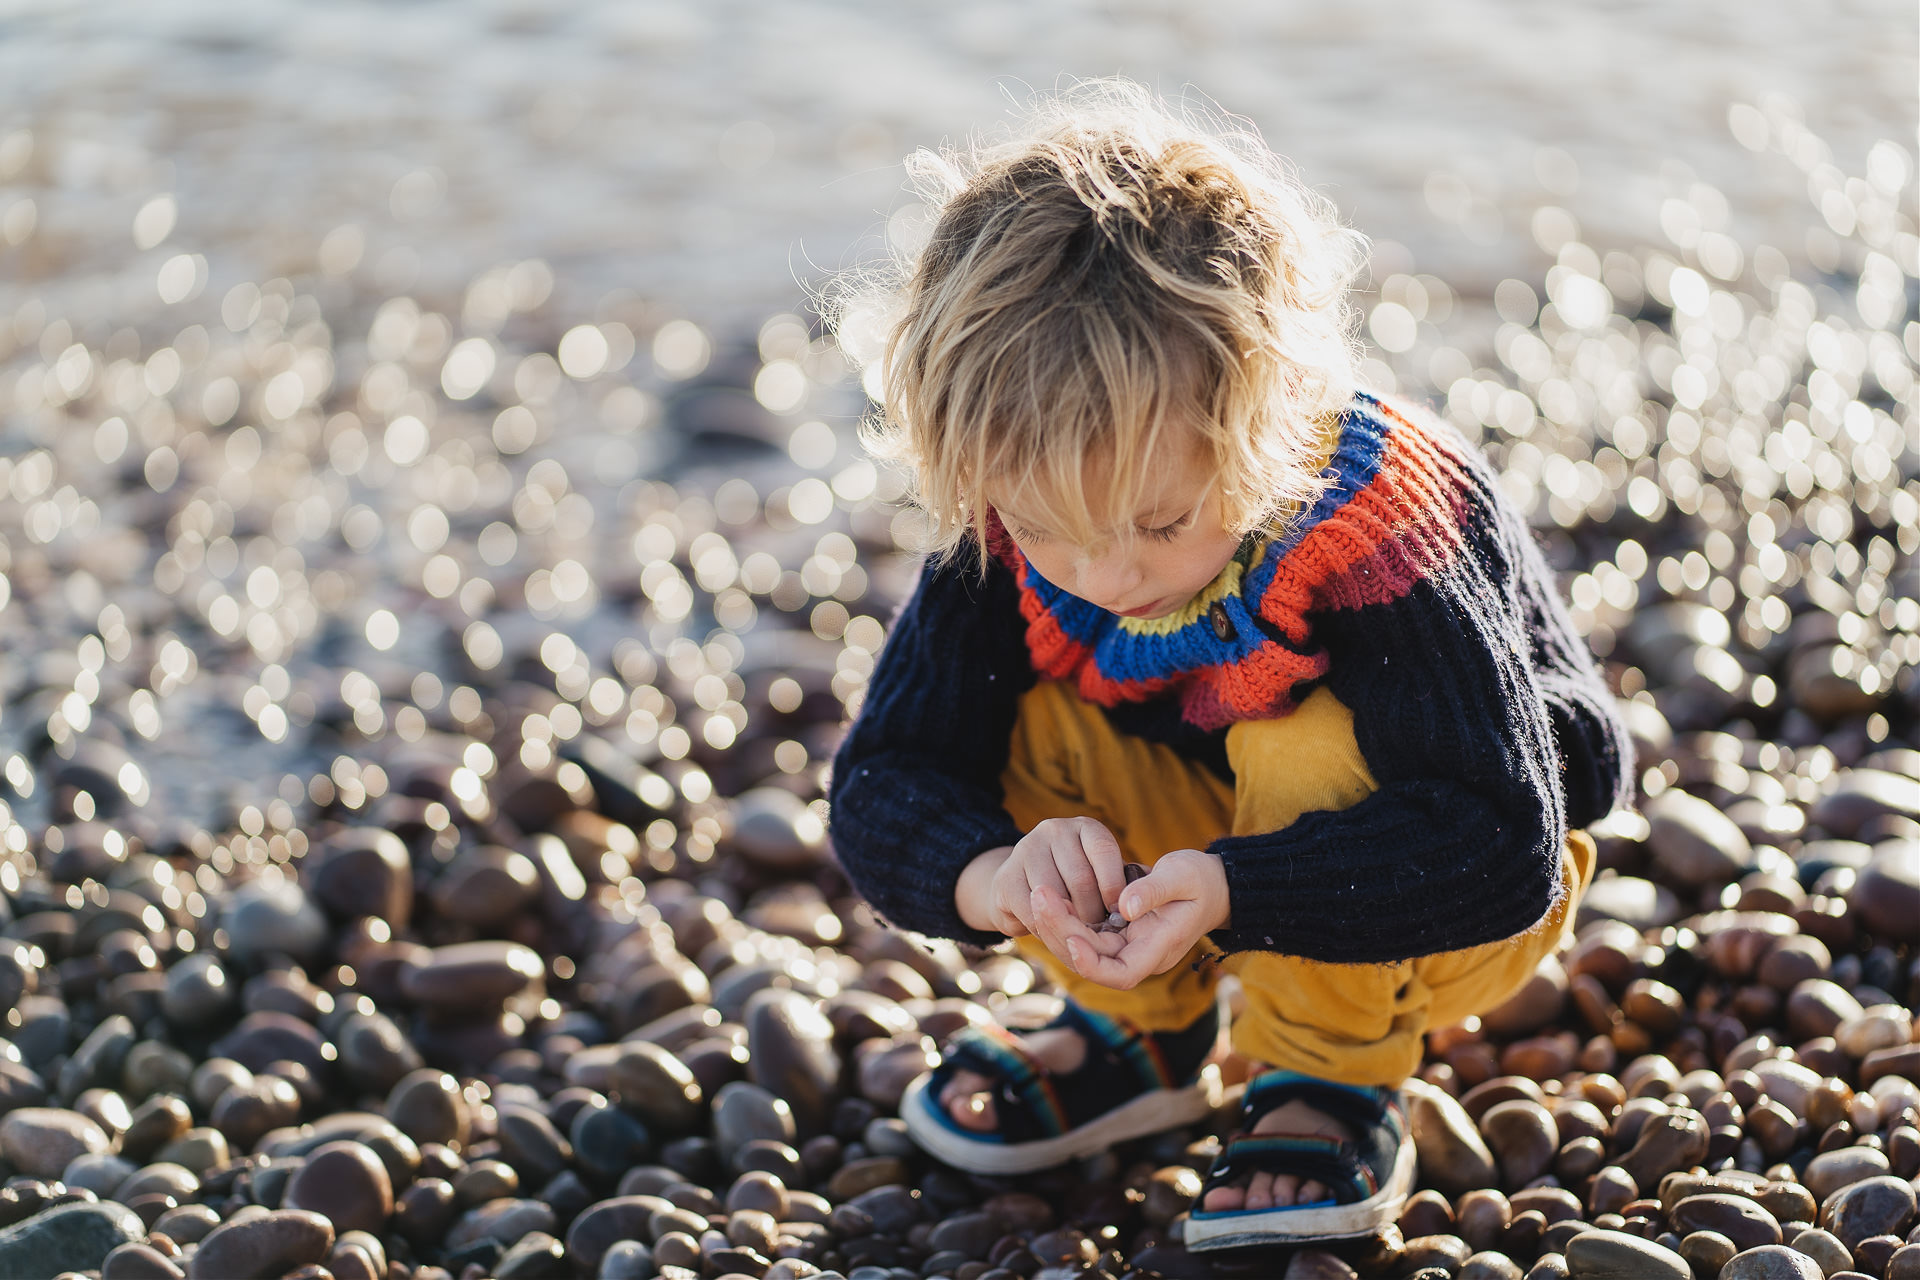 Best Devon family photography of a young boy picking up pebbles on a beach in sunshine